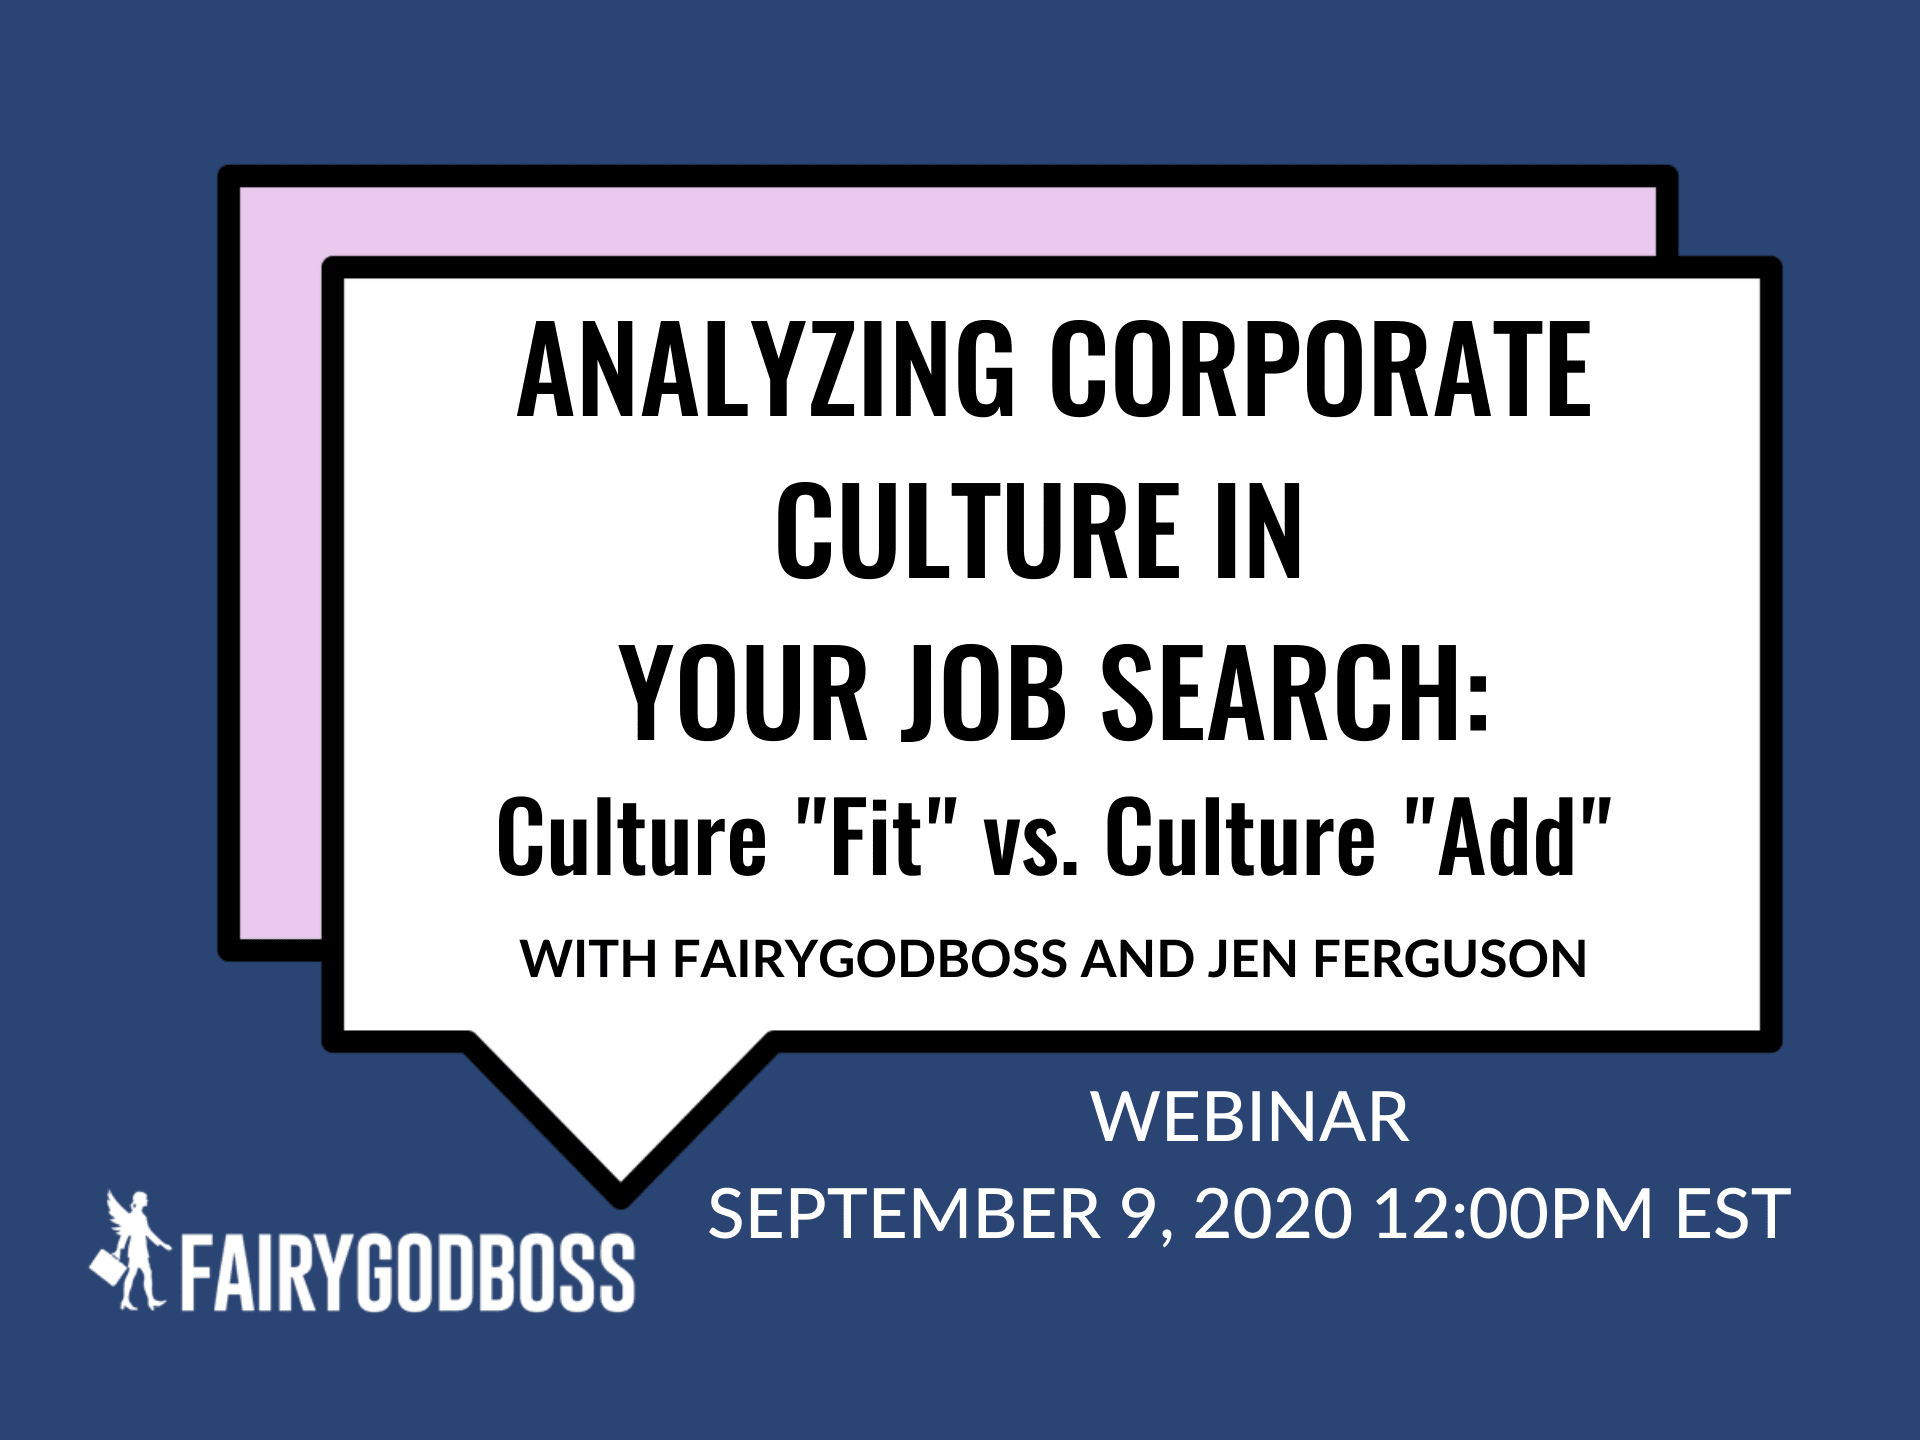 Analyzing Corporate Culture In Your Job Search: Culture "Fit" vs. Culture "Add"